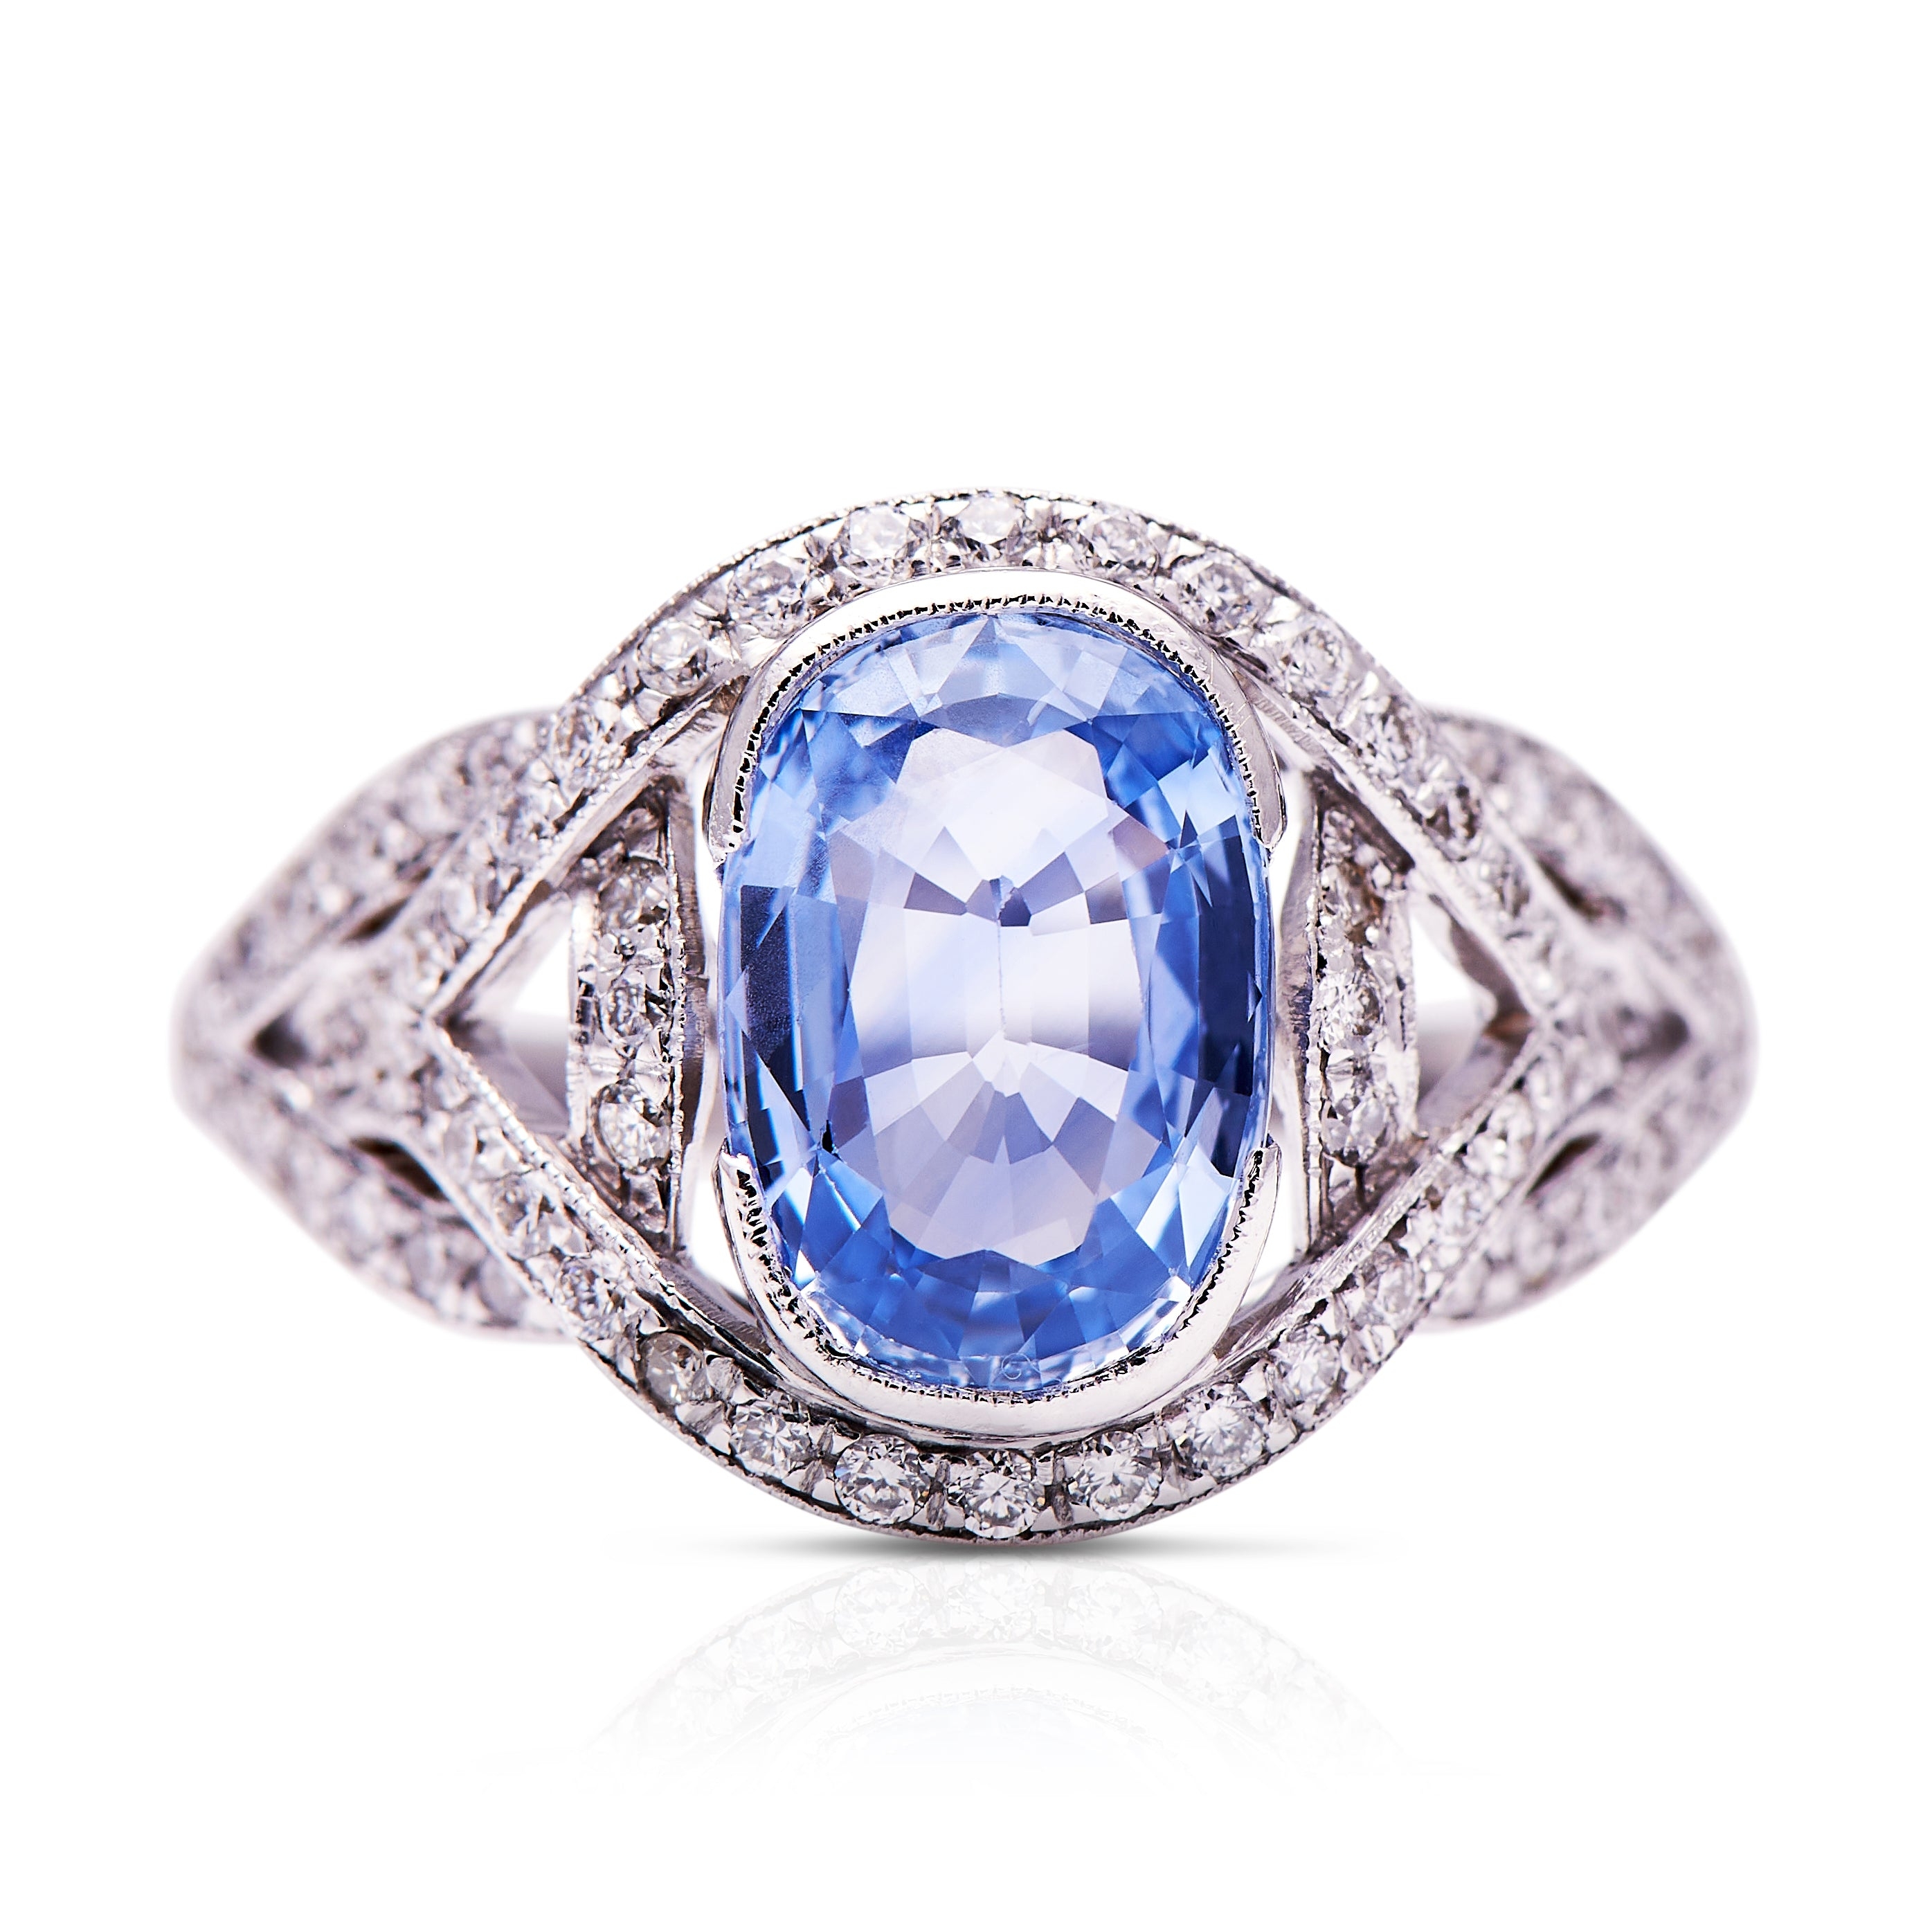 Vintage, 18ct White Gold, Ceylon Sapphire and Diamond Ring – Vintage Ring – Antique Ring Boutique